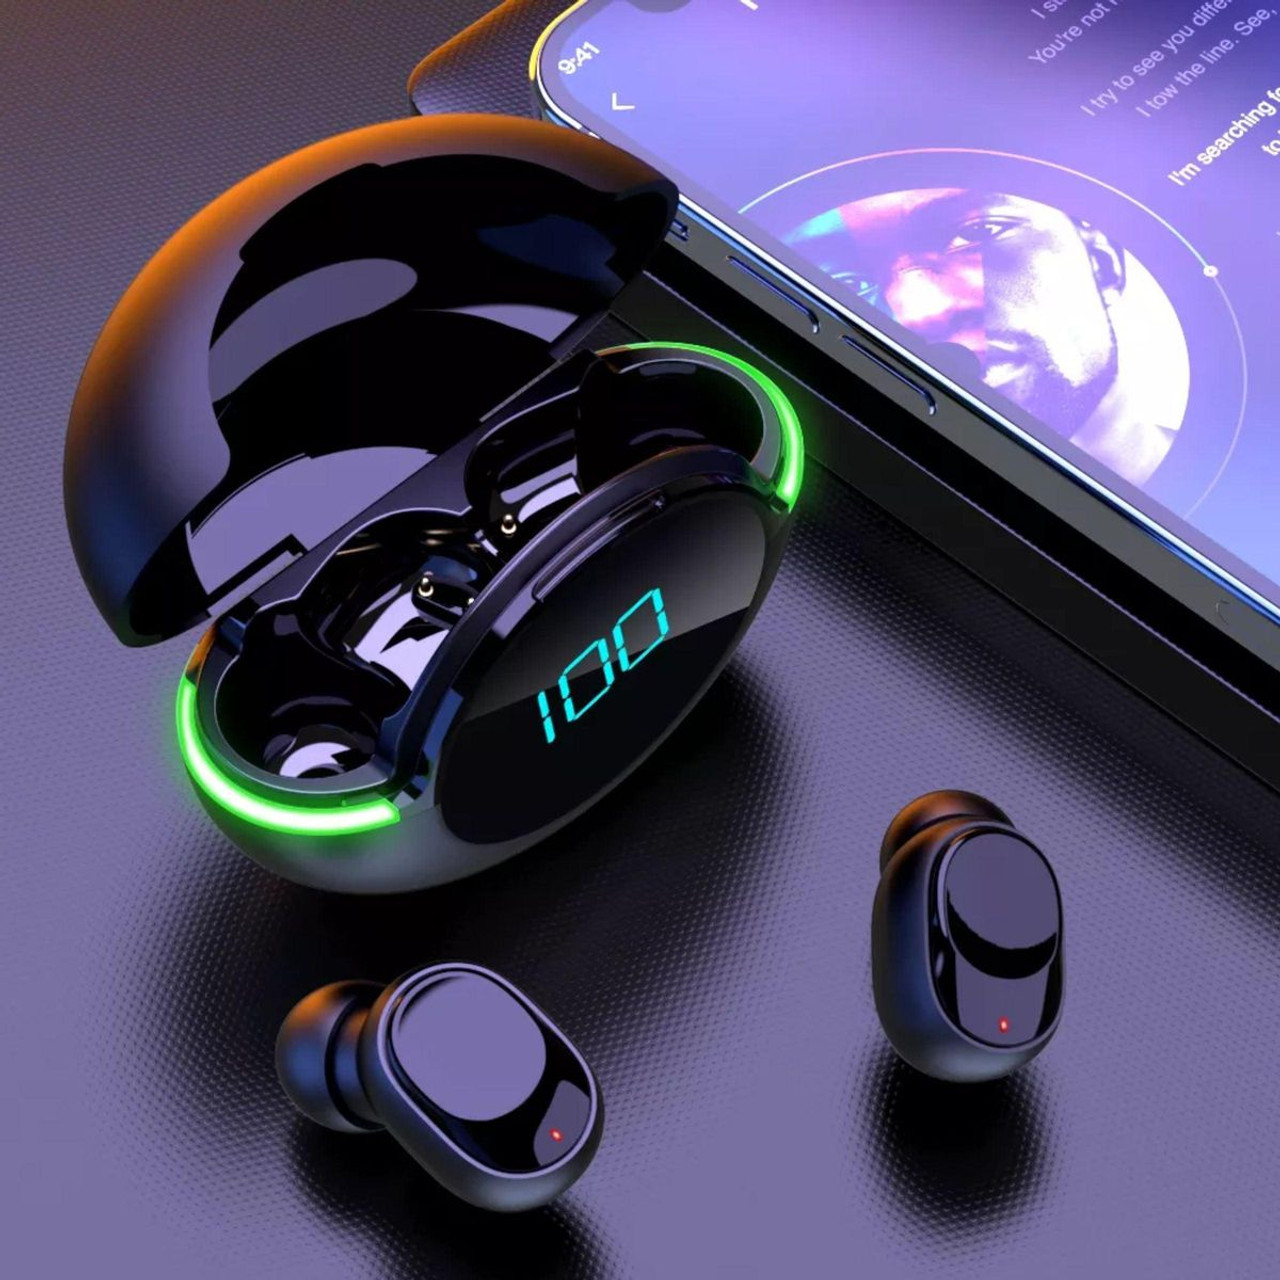 VYSN BestBuds TWS Earbuds with Wireless Digital Display Charging Case product image